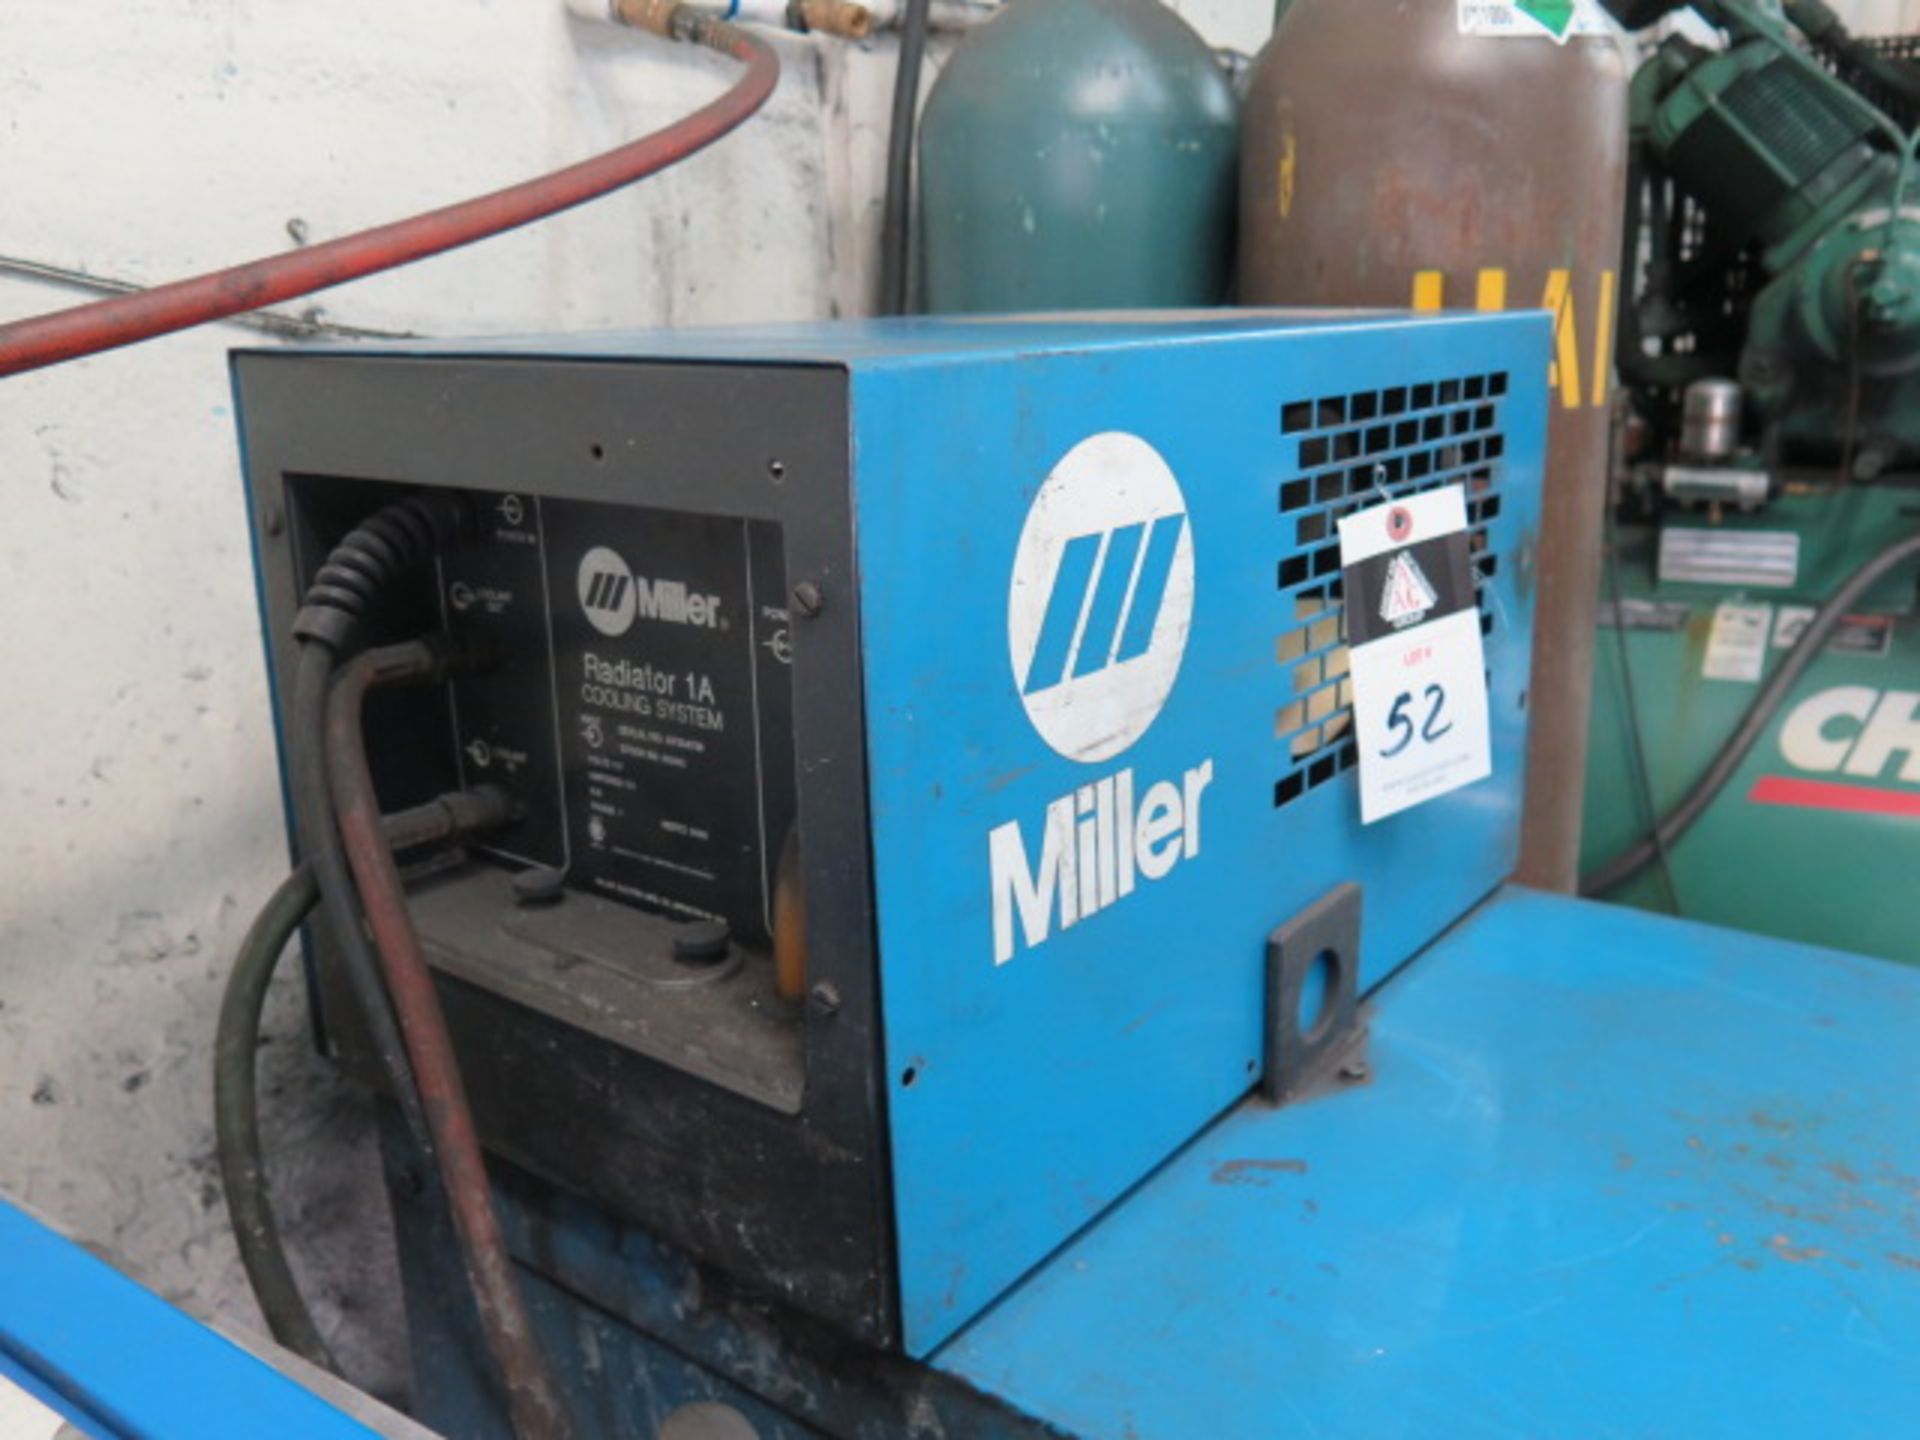 Miller Syncrowave 250 CC-AC/DC Arc Welding Power Source w/ Miller Radiator-1A Cooling, SOLD AS IS - Image 3 of 13